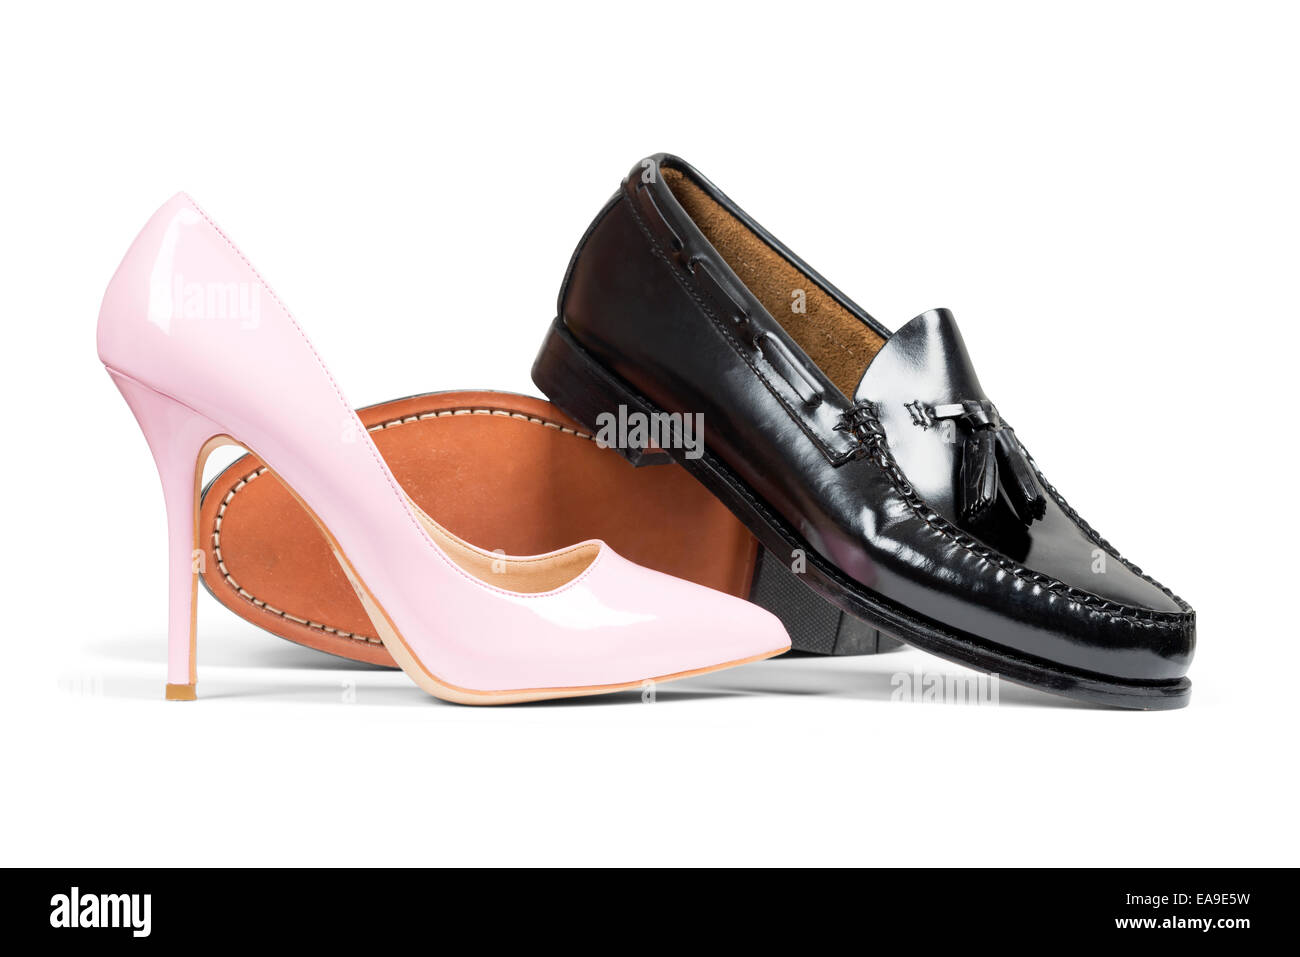 L'homme et des chaussures de luxe pour femmes rose chaussures talon  isolated over white with clipping path Photo Stock - Alamy